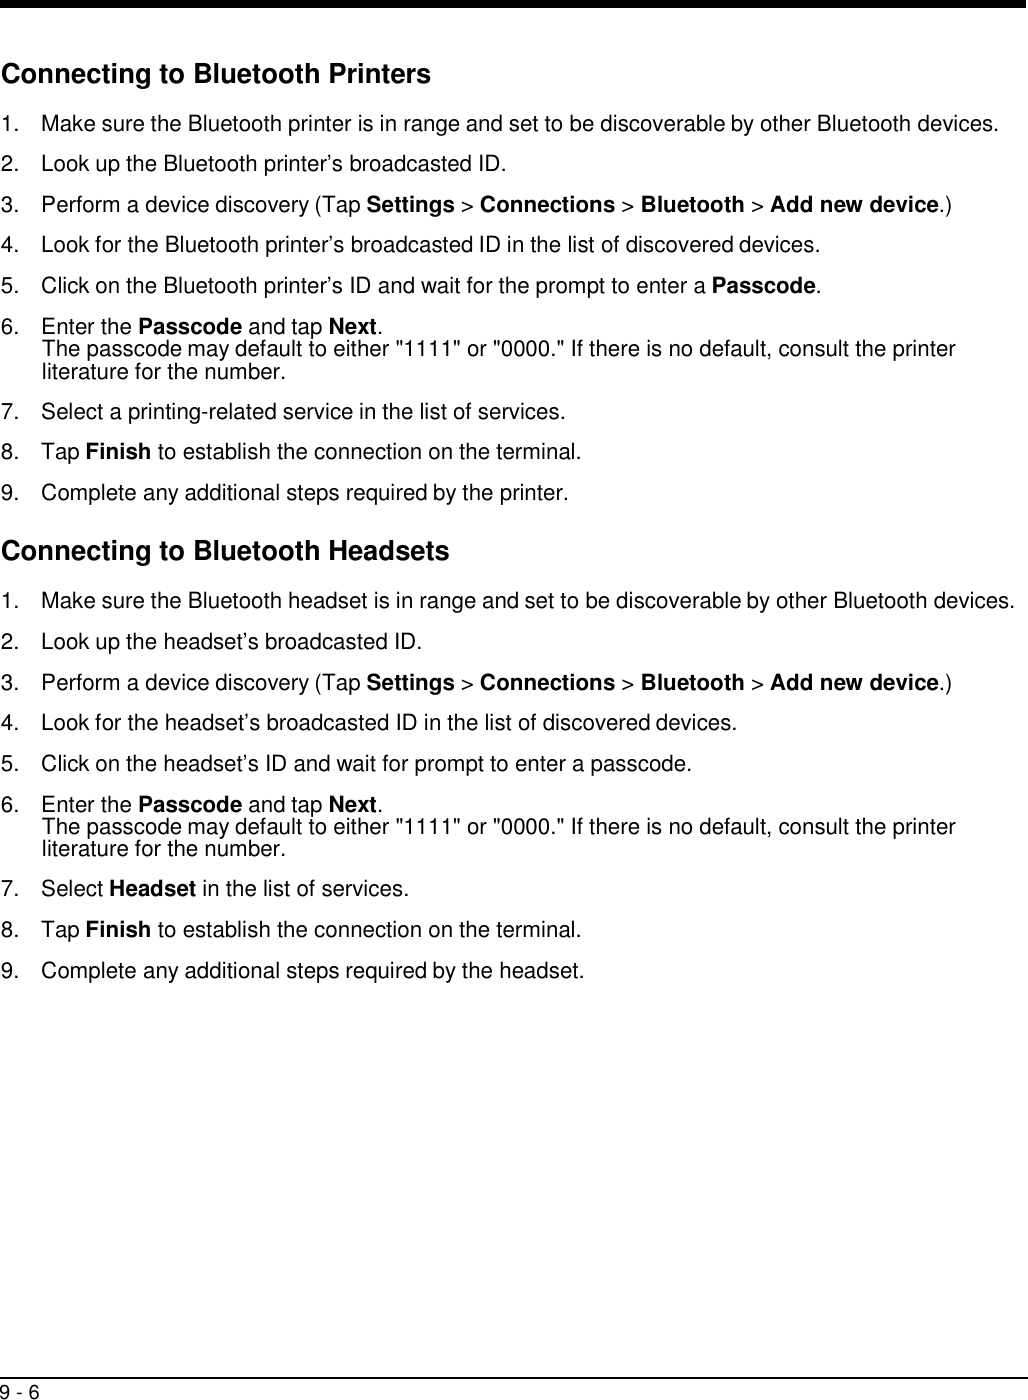 9 - 6     Connecting to Bluetooth Printers  1.  Make sure the Bluetooth printer is in range and set to be discoverable by other Bluetooth devices.  2.  Look up the Bluetooth printer’s broadcasted ID.  3.  Perform a device discovery (Tap Settings &gt; Connections &gt; Bluetooth &gt; Add new device.)  4.  Look for the Bluetooth printer’s broadcasted ID in the list of discovered devices.  5.  Click on the Bluetooth printer’s ID and wait for the prompt to enter a Passcode.  6.  Enter the Passcode and tap Next. The passcode may default to either &quot;1111&quot; or &quot;0000.&quot; If there is no default, consult the printer literature for the number.  7.  Select a printing-related service in the list of services.  8.  Tap Finish to establish the connection on the terminal.  9.  Complete any additional steps required by the printer.  Connecting to Bluetooth Headsets  1.  Make sure the Bluetooth headset is in range and set to be discoverable by other Bluetooth devices.  2.  Look up the headset’s broadcasted ID.  3.  Perform a device discovery (Tap Settings &gt; Connections &gt; Bluetooth &gt; Add new device.)  4.  Look for the headset’s broadcasted ID in the list of discovered devices.  5.  Click on the headset’s ID and wait for prompt to enter a passcode.  6.  Enter the Passcode and tap Next. The passcode may default to either &quot;1111&quot; or &quot;0000.&quot; If there is no default, consult the printer literature for the number.  7.  Select Headset in the list of services.  8.  Tap Finish to establish the connection on the terminal.  9.  Complete any additional steps required by the headset. 